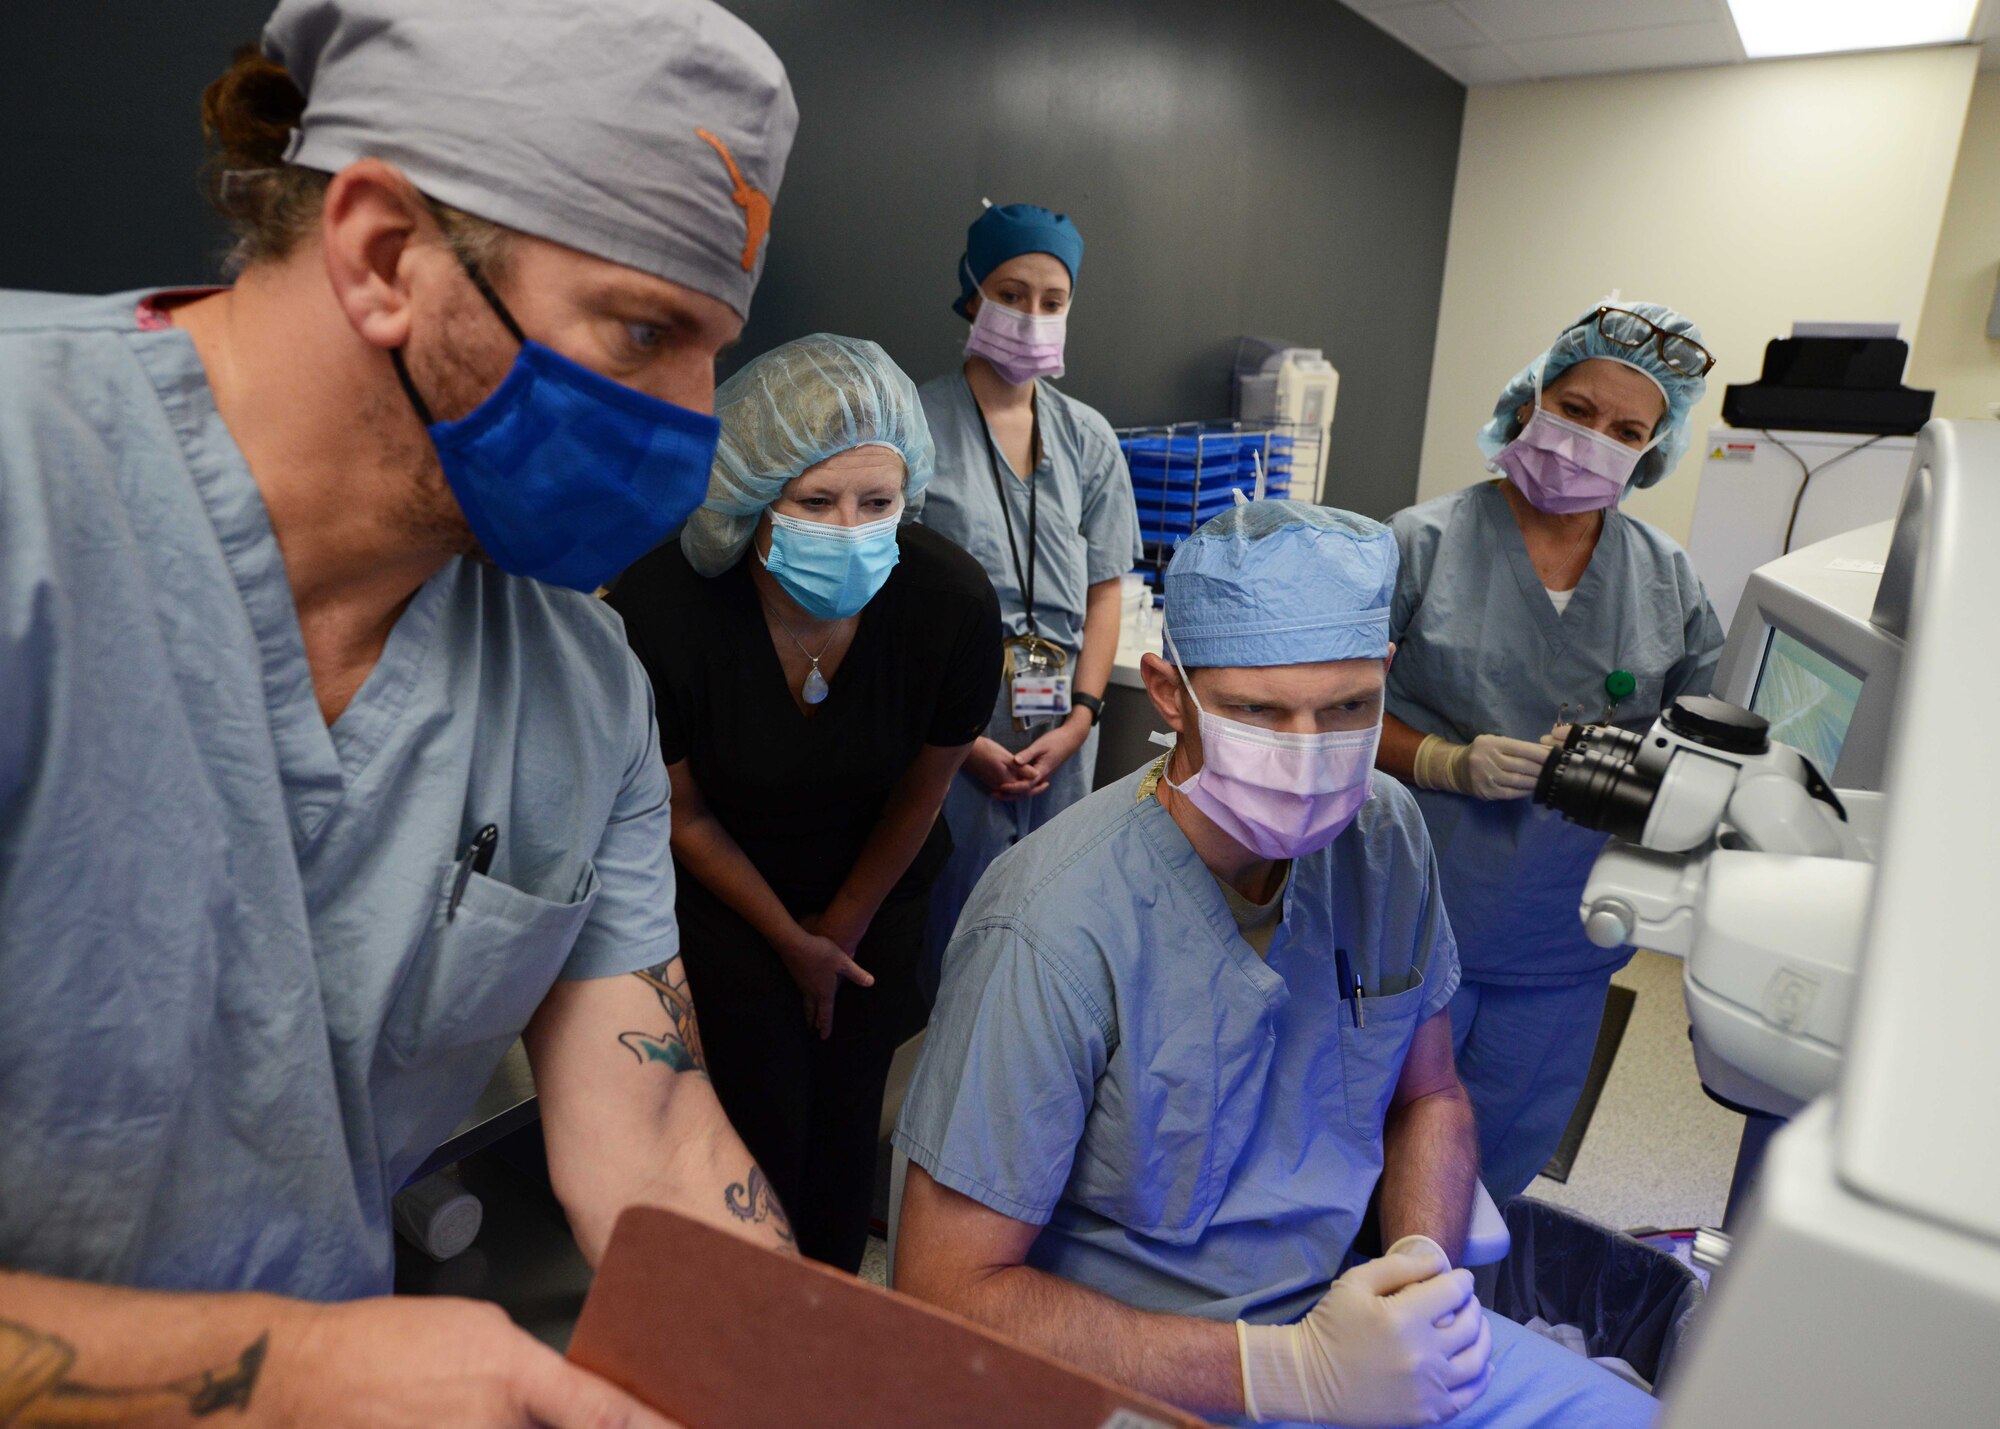 Lt. Col. Marcus Neuffer (center), chief surgeon assigned to the 10th Medical Group, Air Force Academy, Colo., and his staff, evaluates a patient during a small incisional lenticular extraction (SMILE) eye surgery, Aug. 19, 2021.